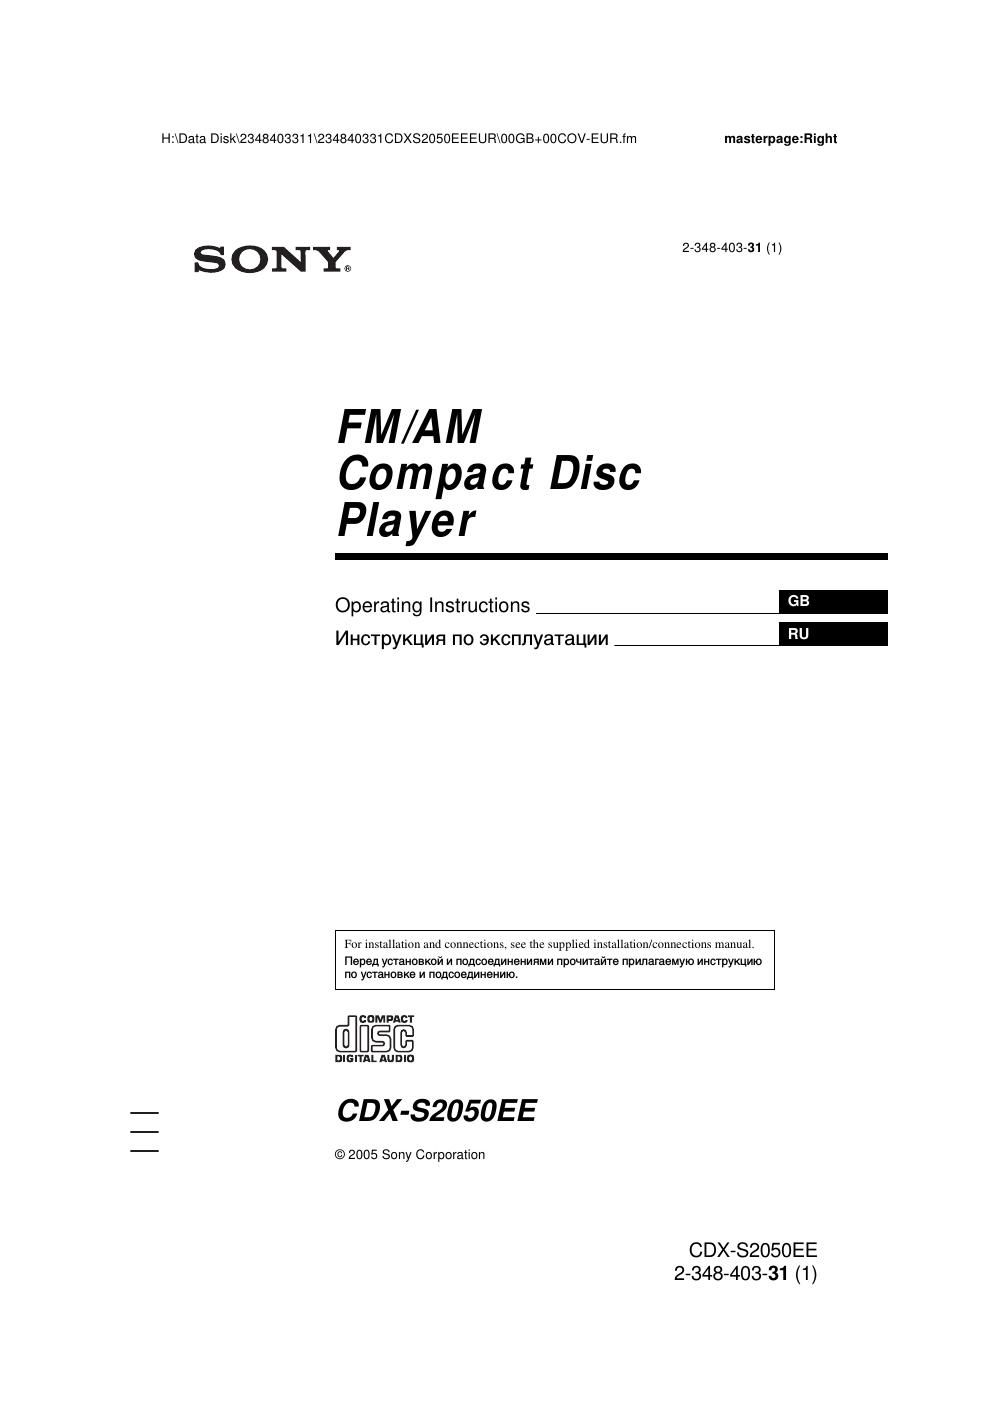 sony cdx s 2050 ee owners manual